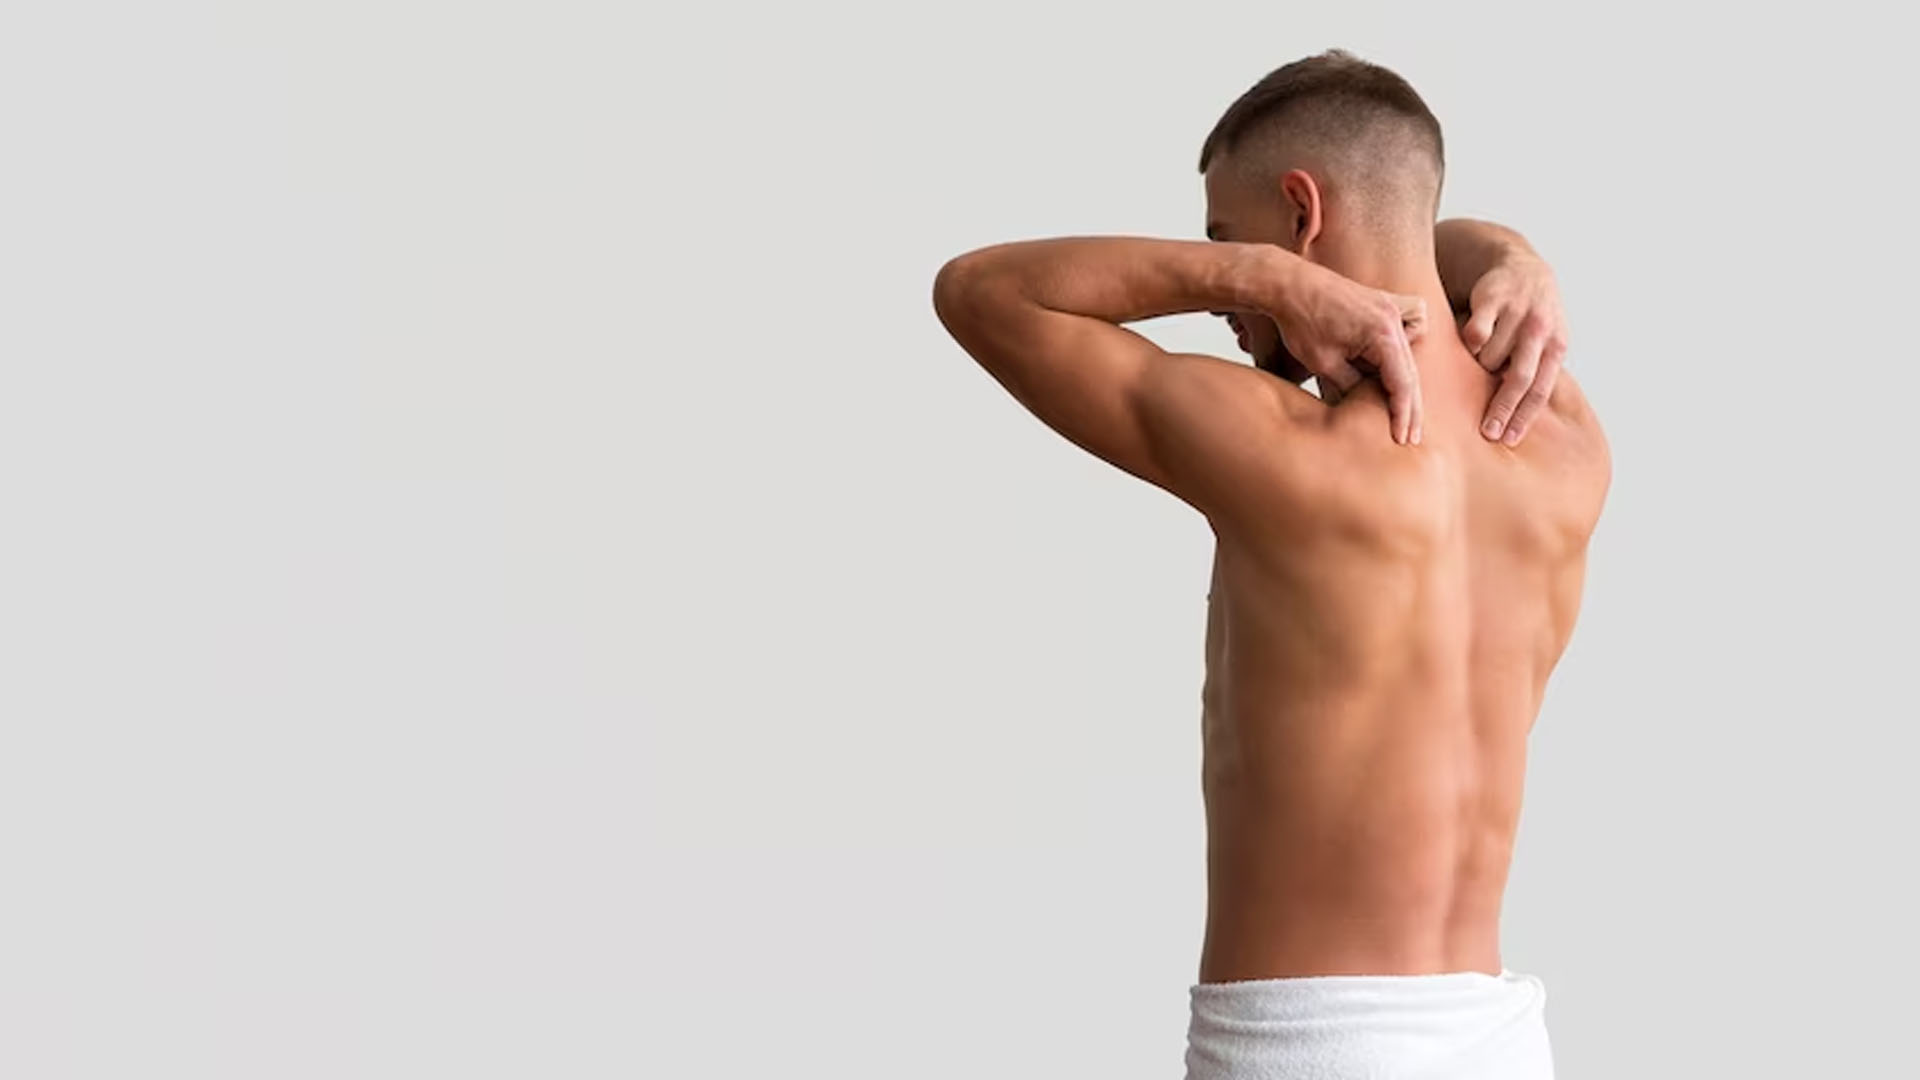 What Are The Health Benefits of Keeping The Spine Erectly?